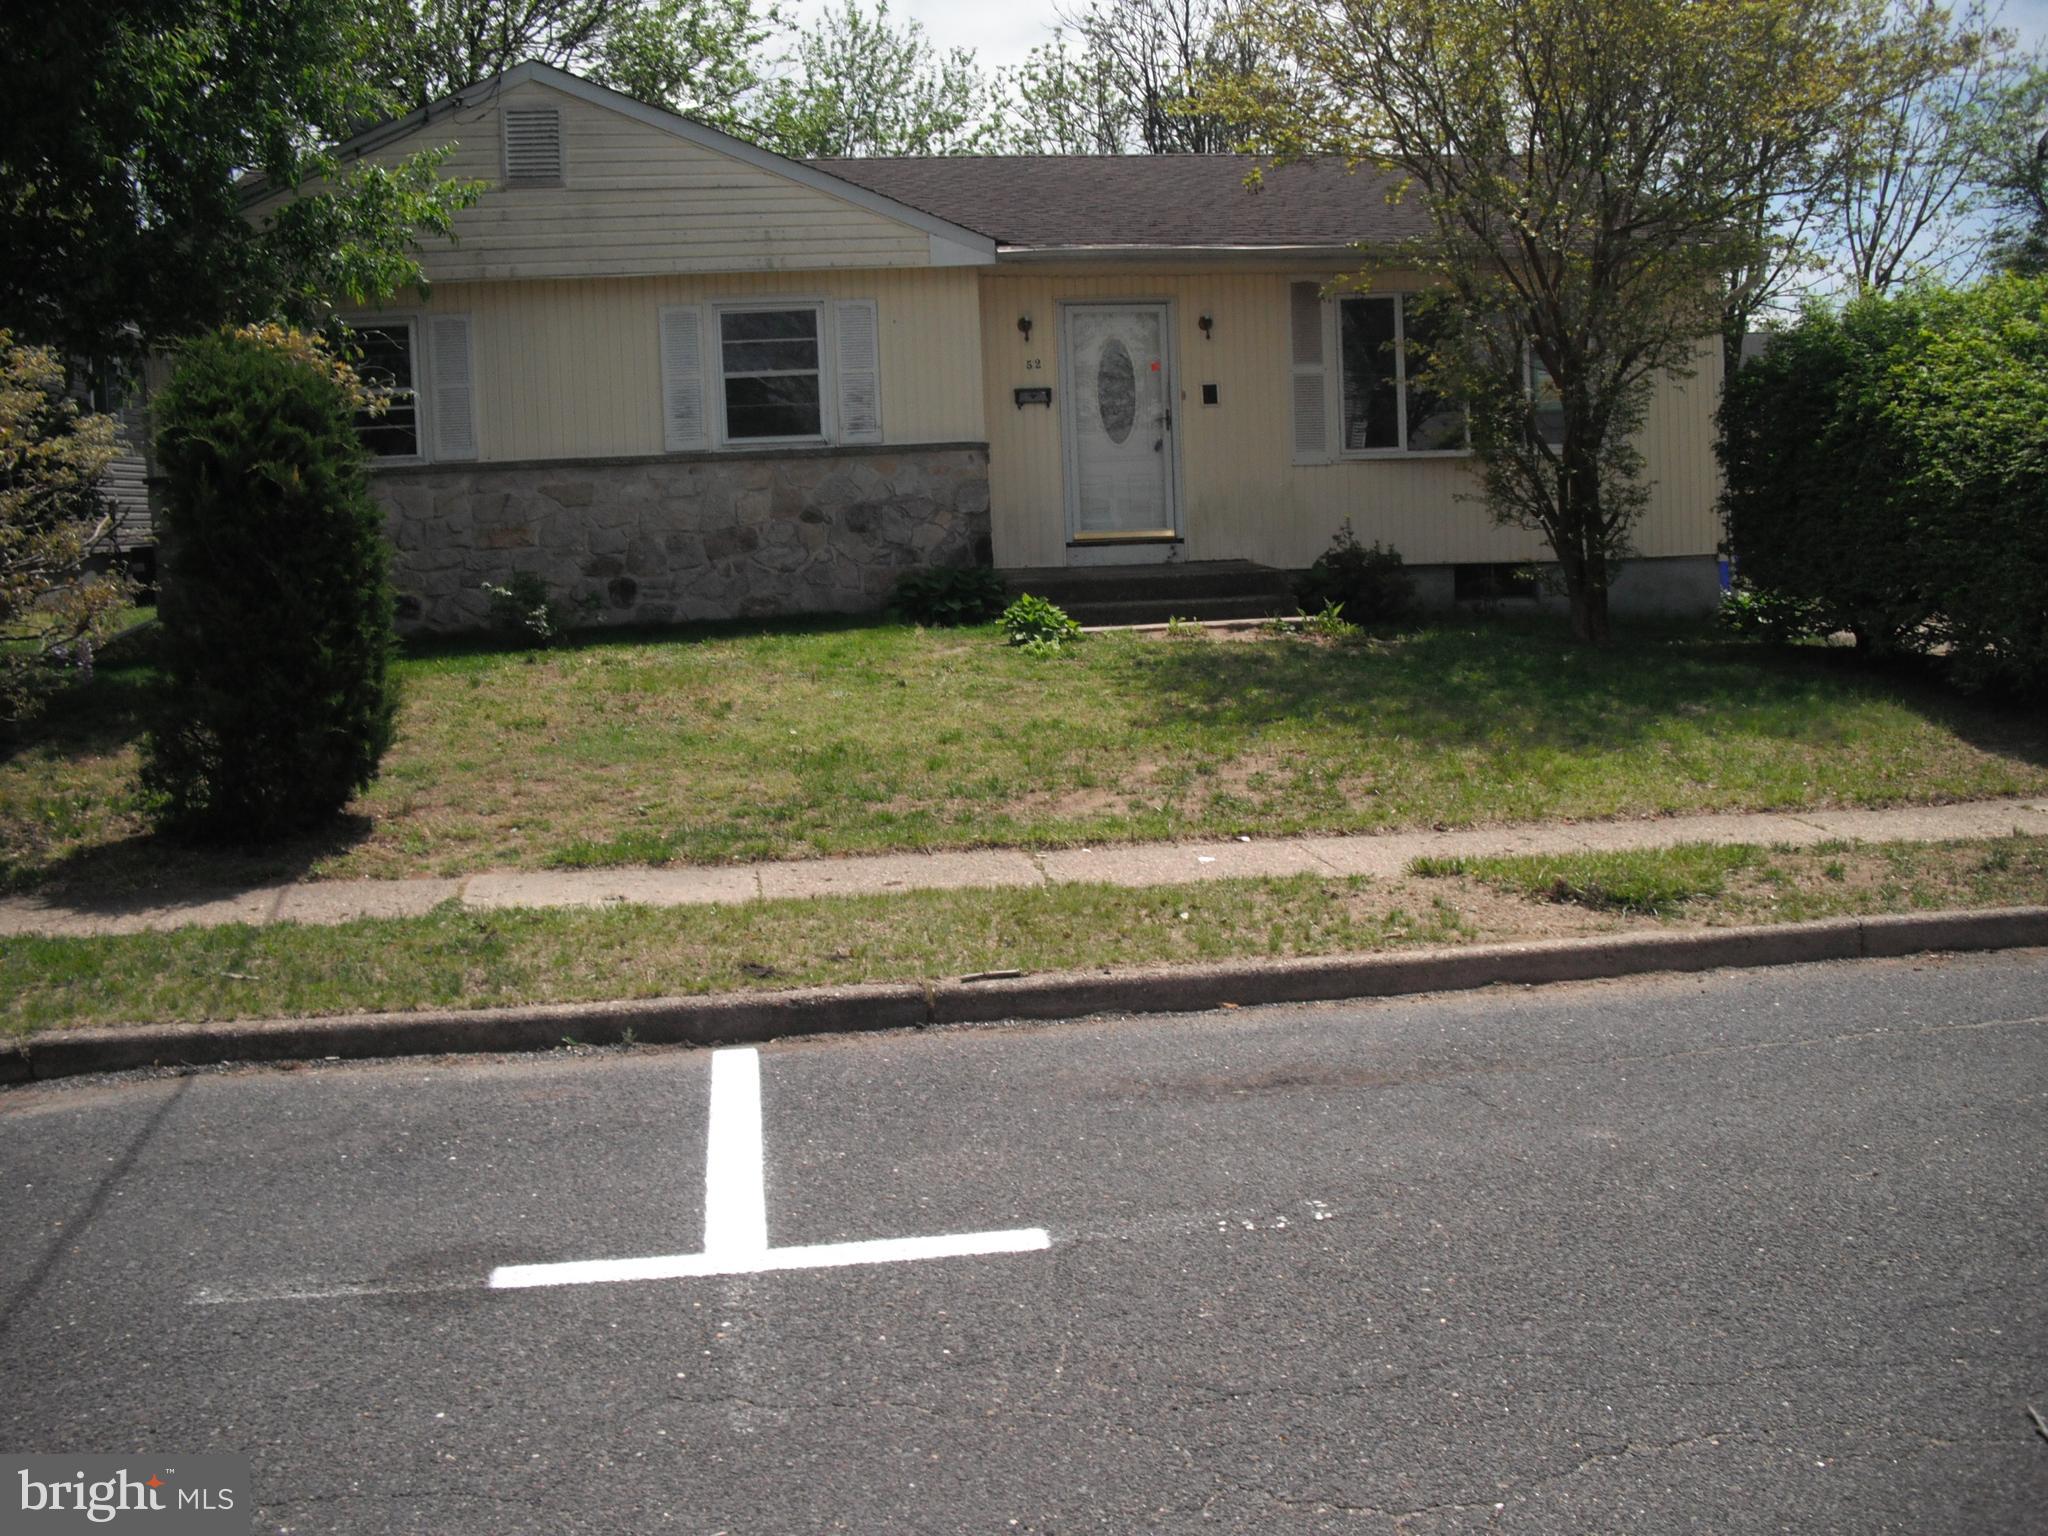 a view of a house with a yard